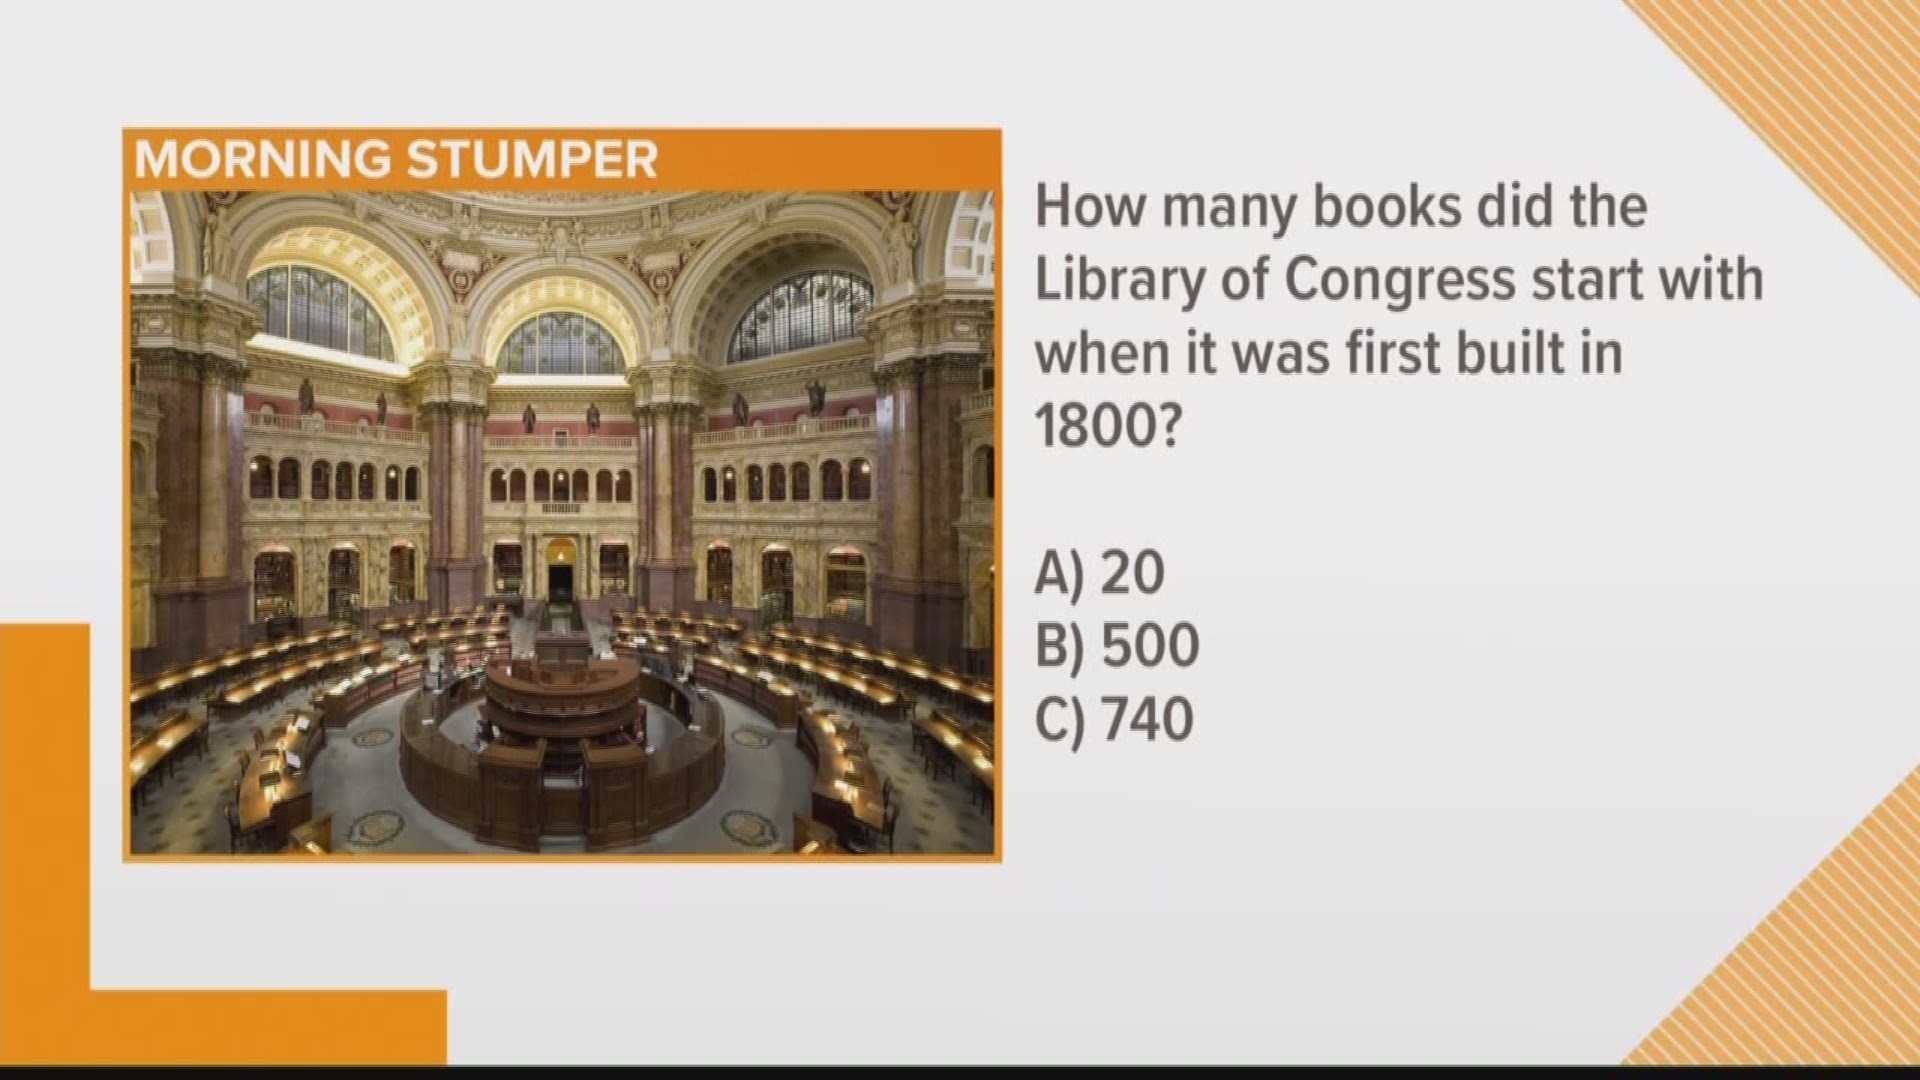 Stumper: How many books did the Library of Congress start with when it was first built in 1800?